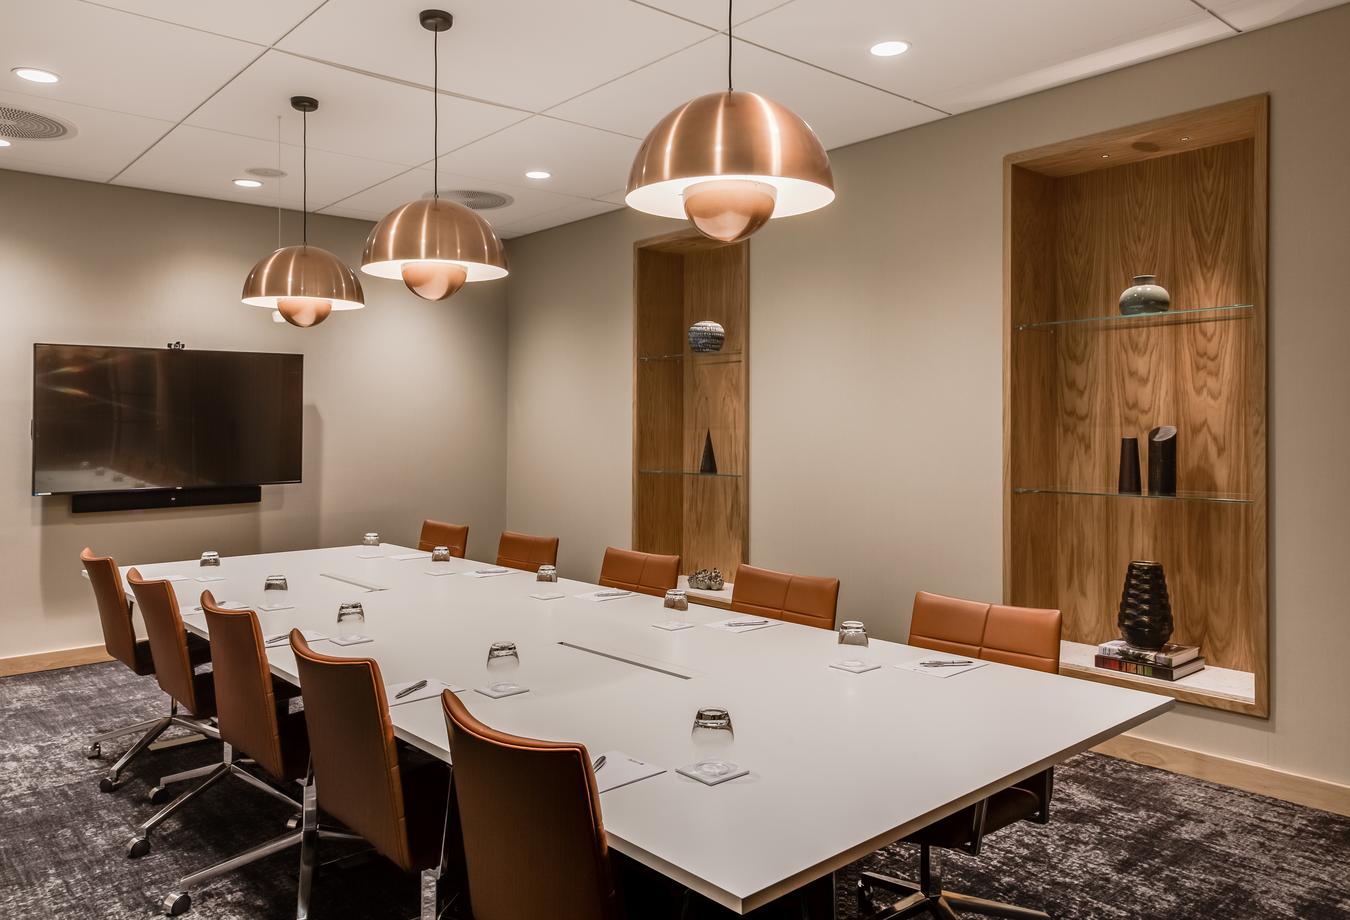 Conference room with classic-style interior. Photo